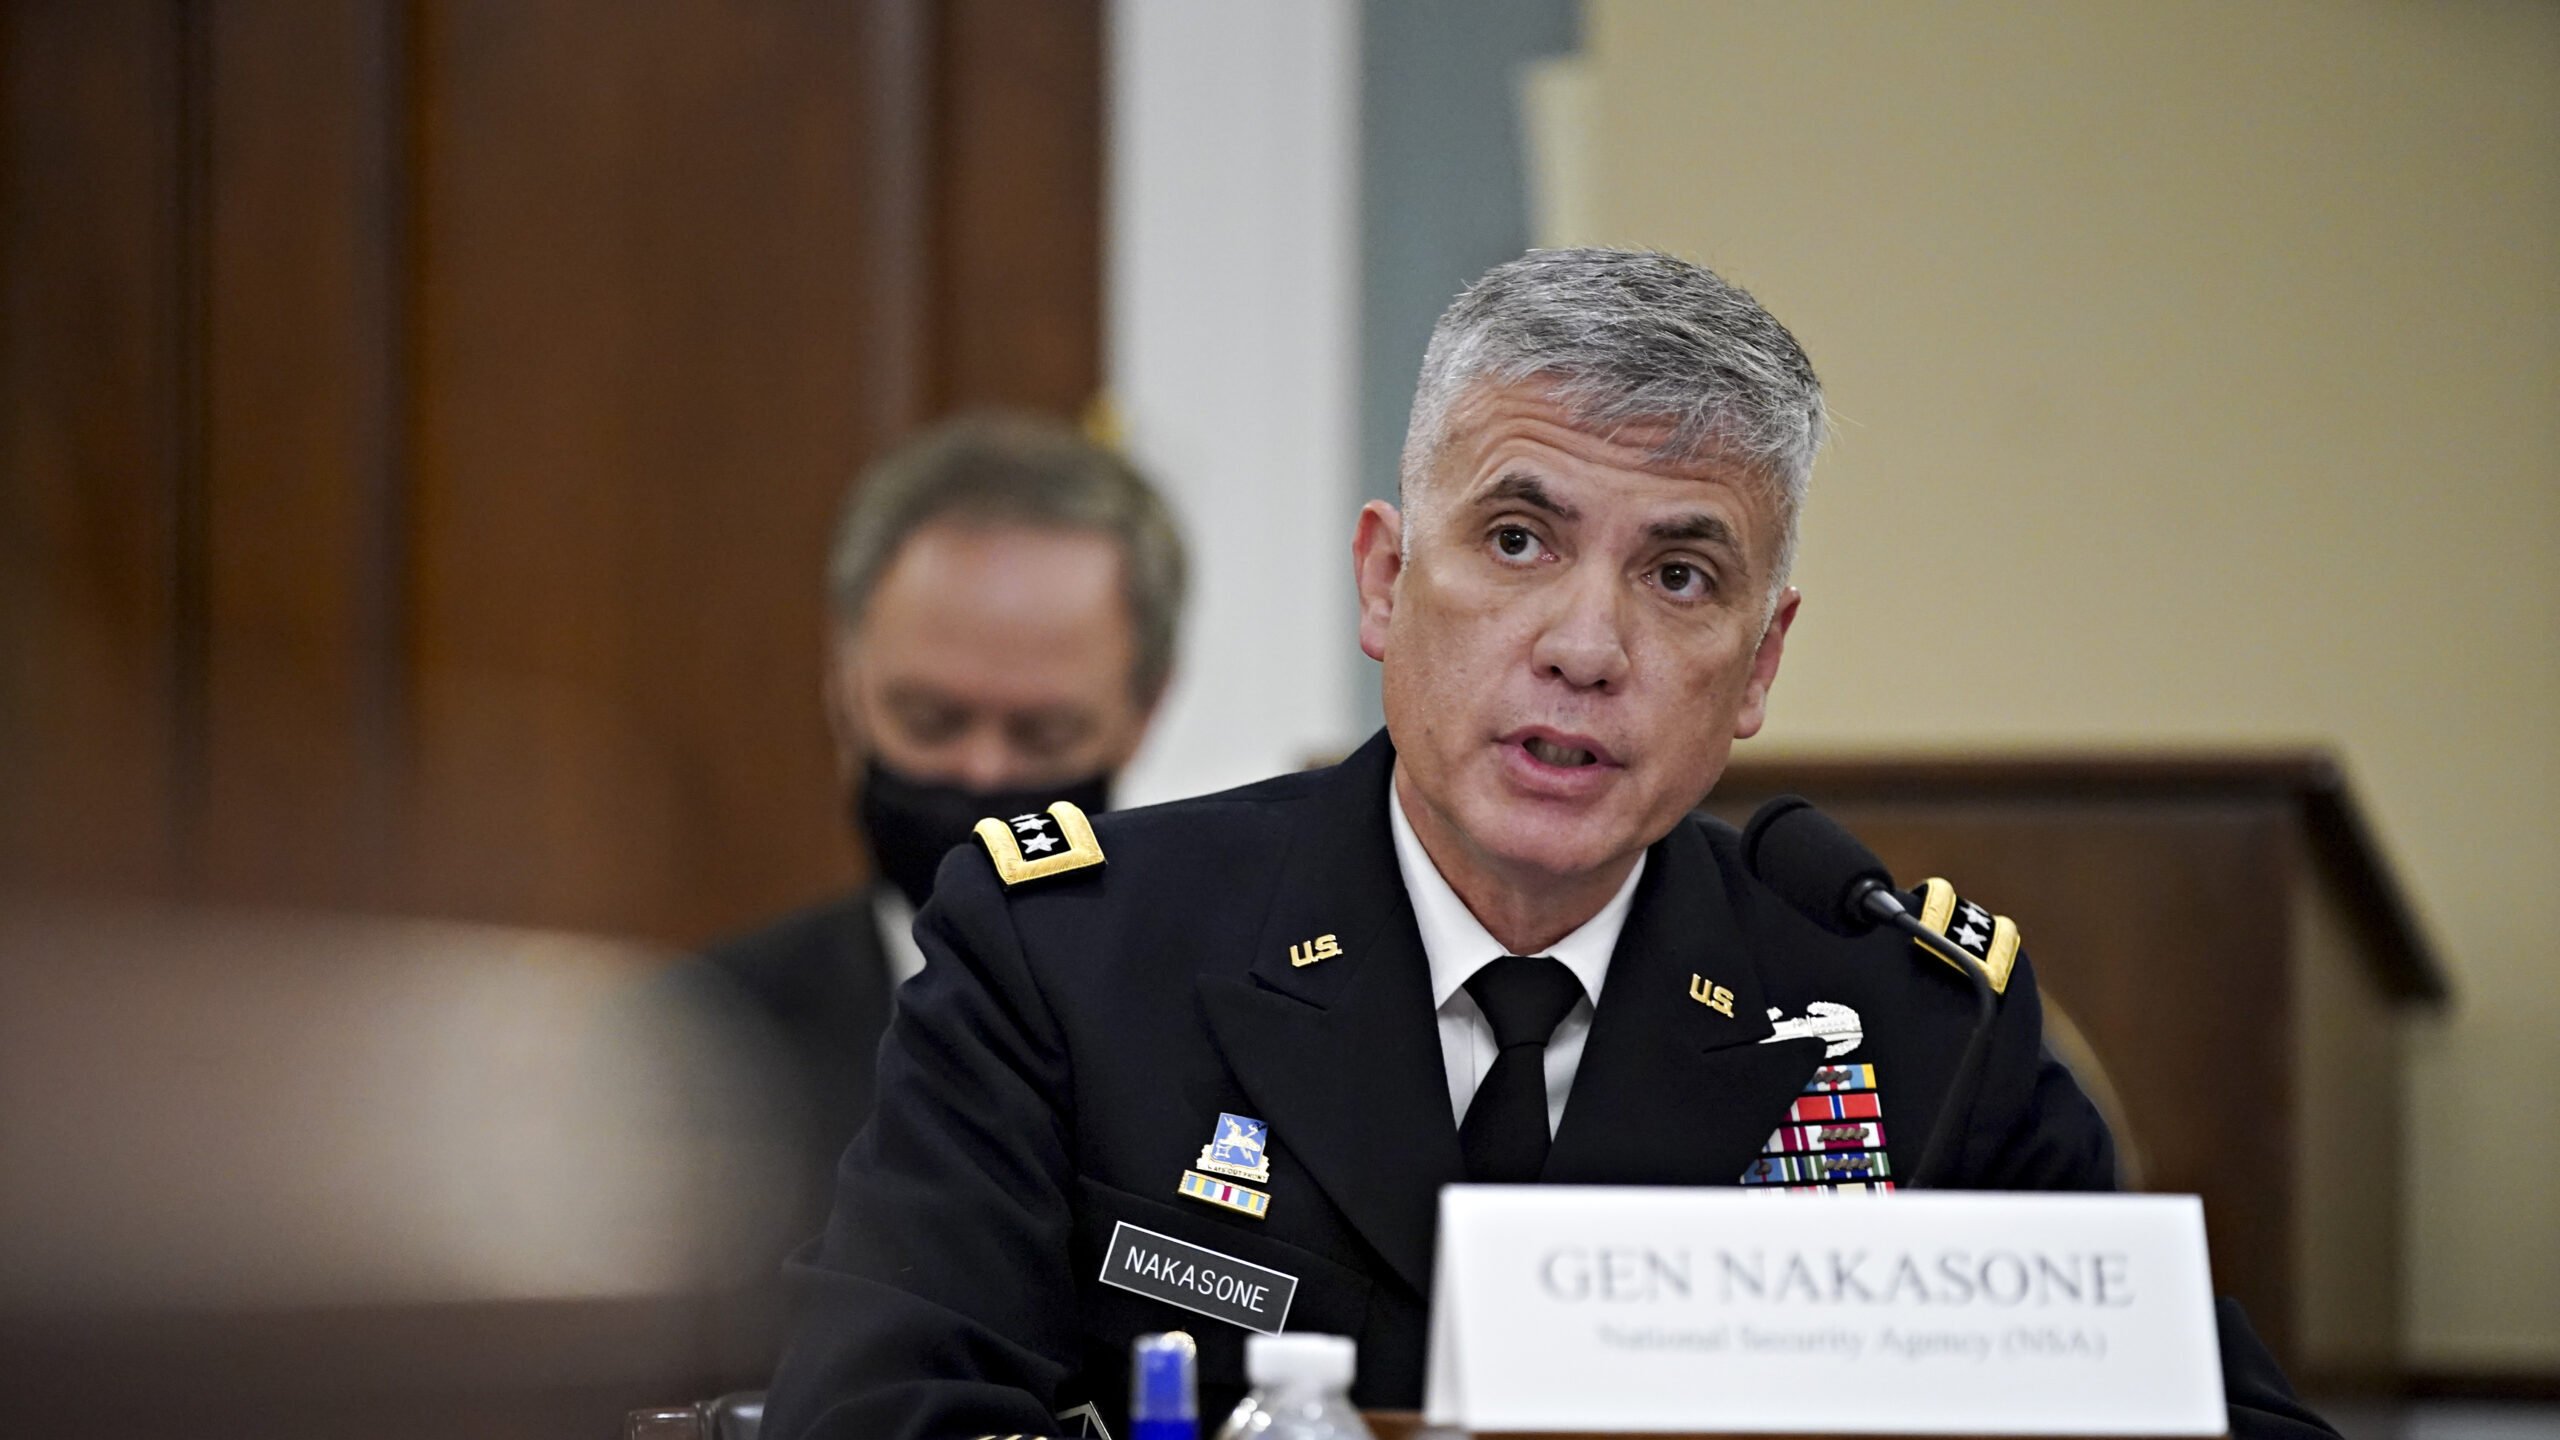 Nakasone: Cold War-style deterrence ‘does not comport to cyberspace’